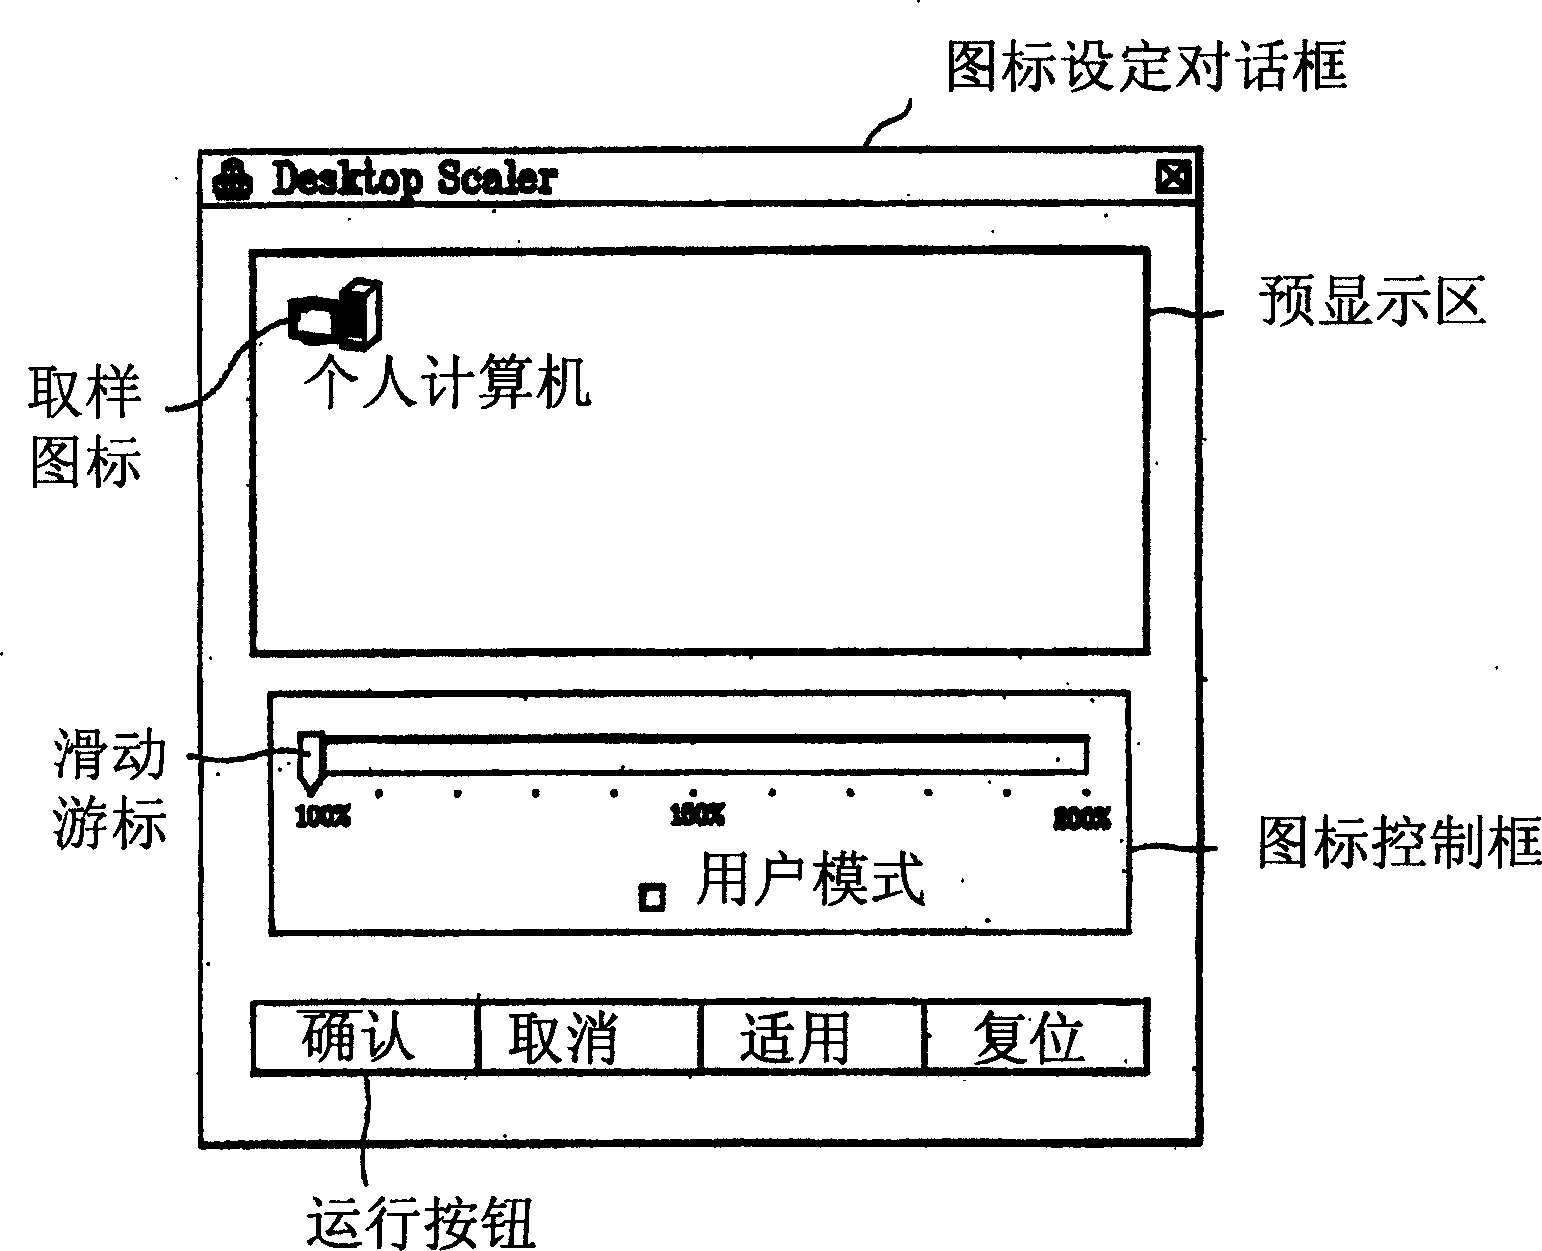 Icon control method of display system